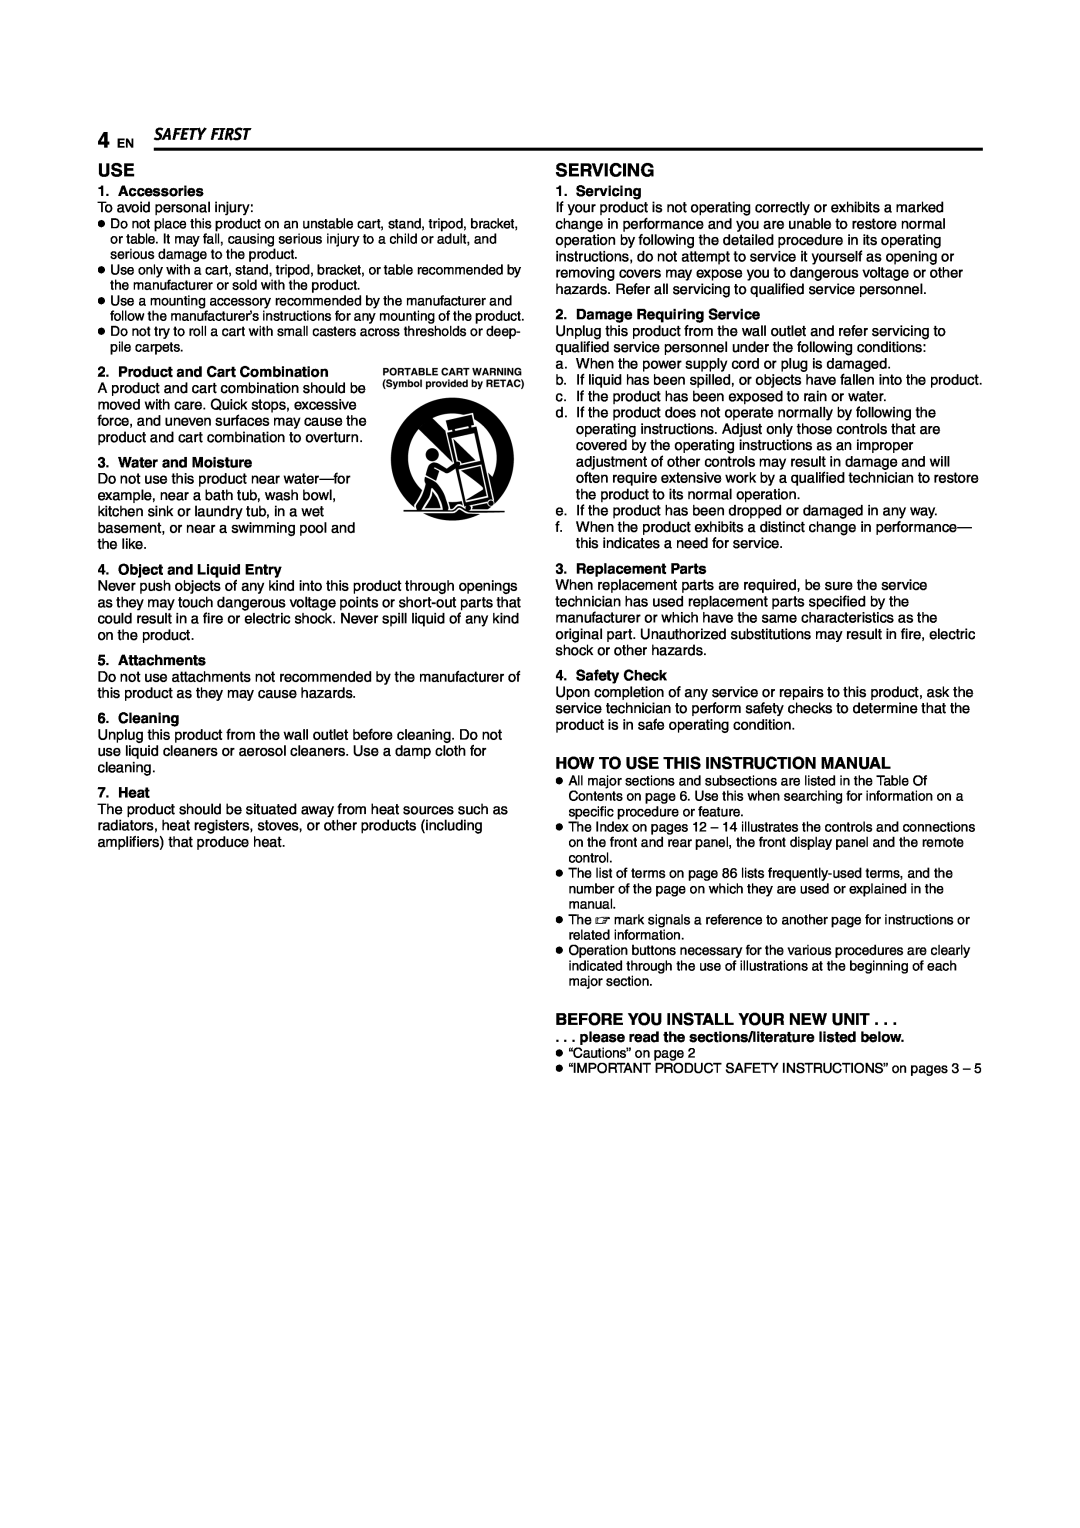 JVC DR-MV5S Safety First, Servicing, How To Use This Instruction Manual, Before You Install Your New Unit, Accessories 